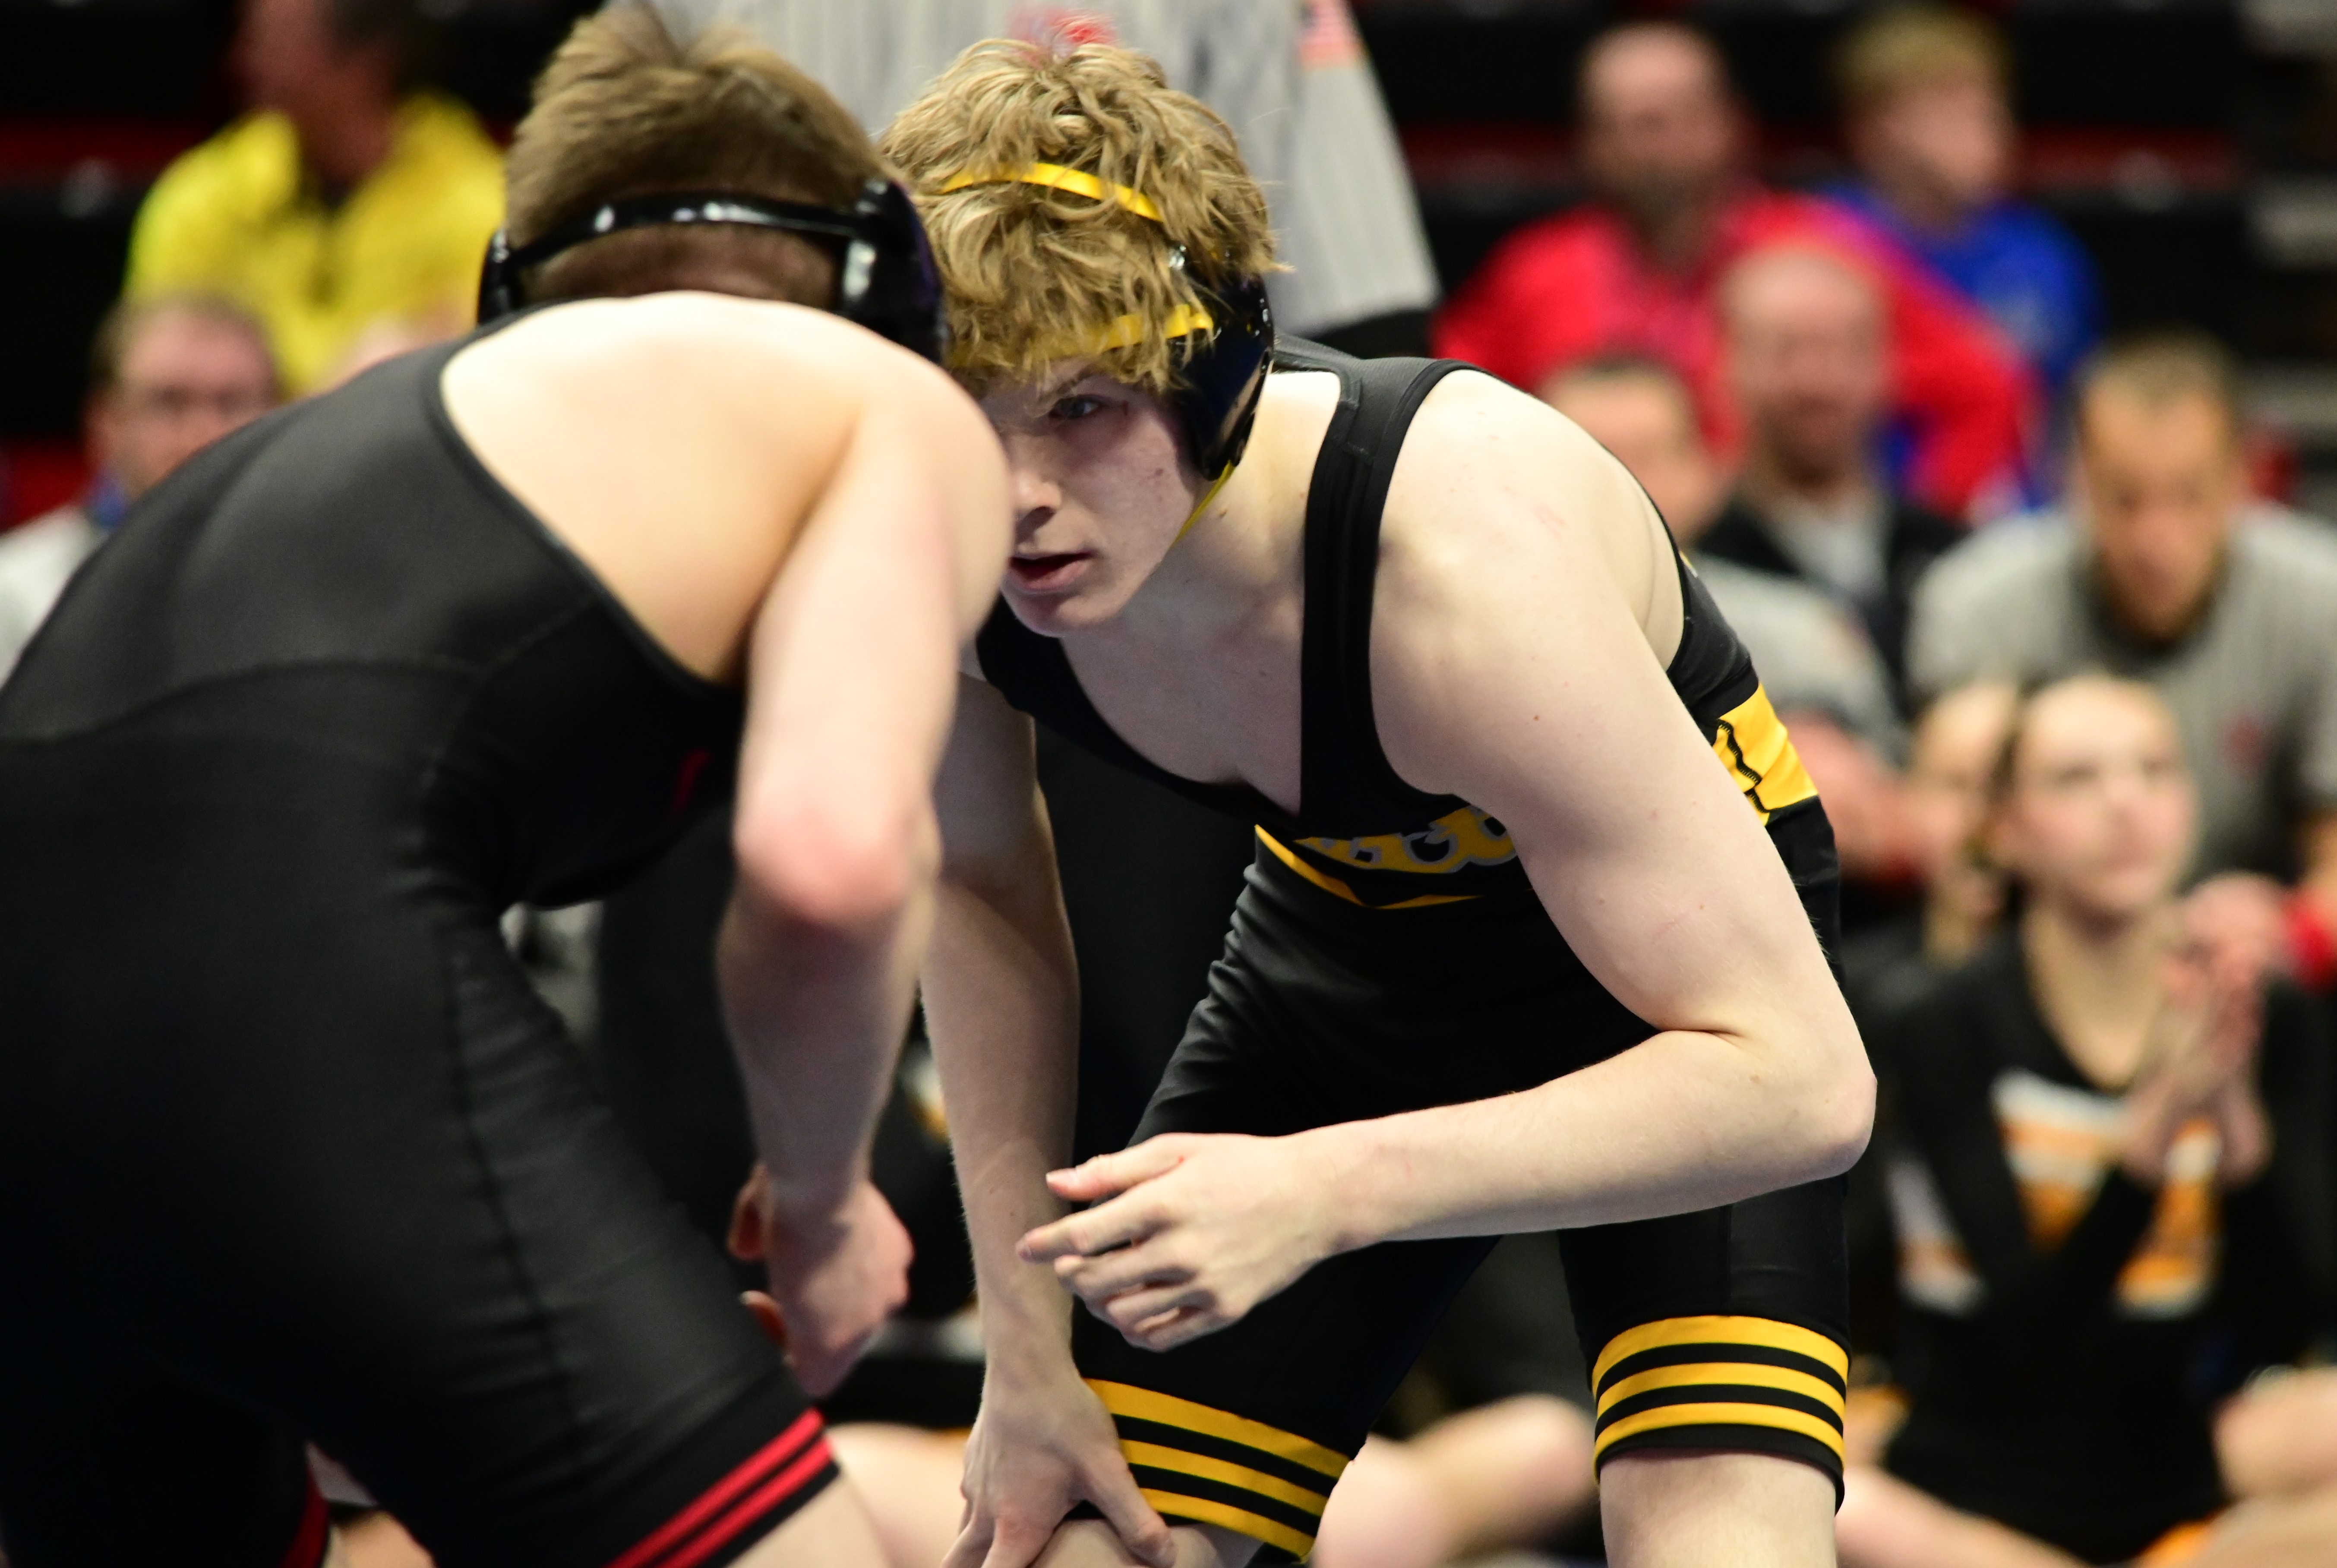 Bettendorf's Jake Knight looks at his opponent, Fort Dodge's Dru Ayala, during a Class 3A semifinal match at 120 pounds during the Iowa high school wrestling state tournament at Wells Fargo Arena in Des Moines on Friday. (Photo by Ryan Timmerman) 